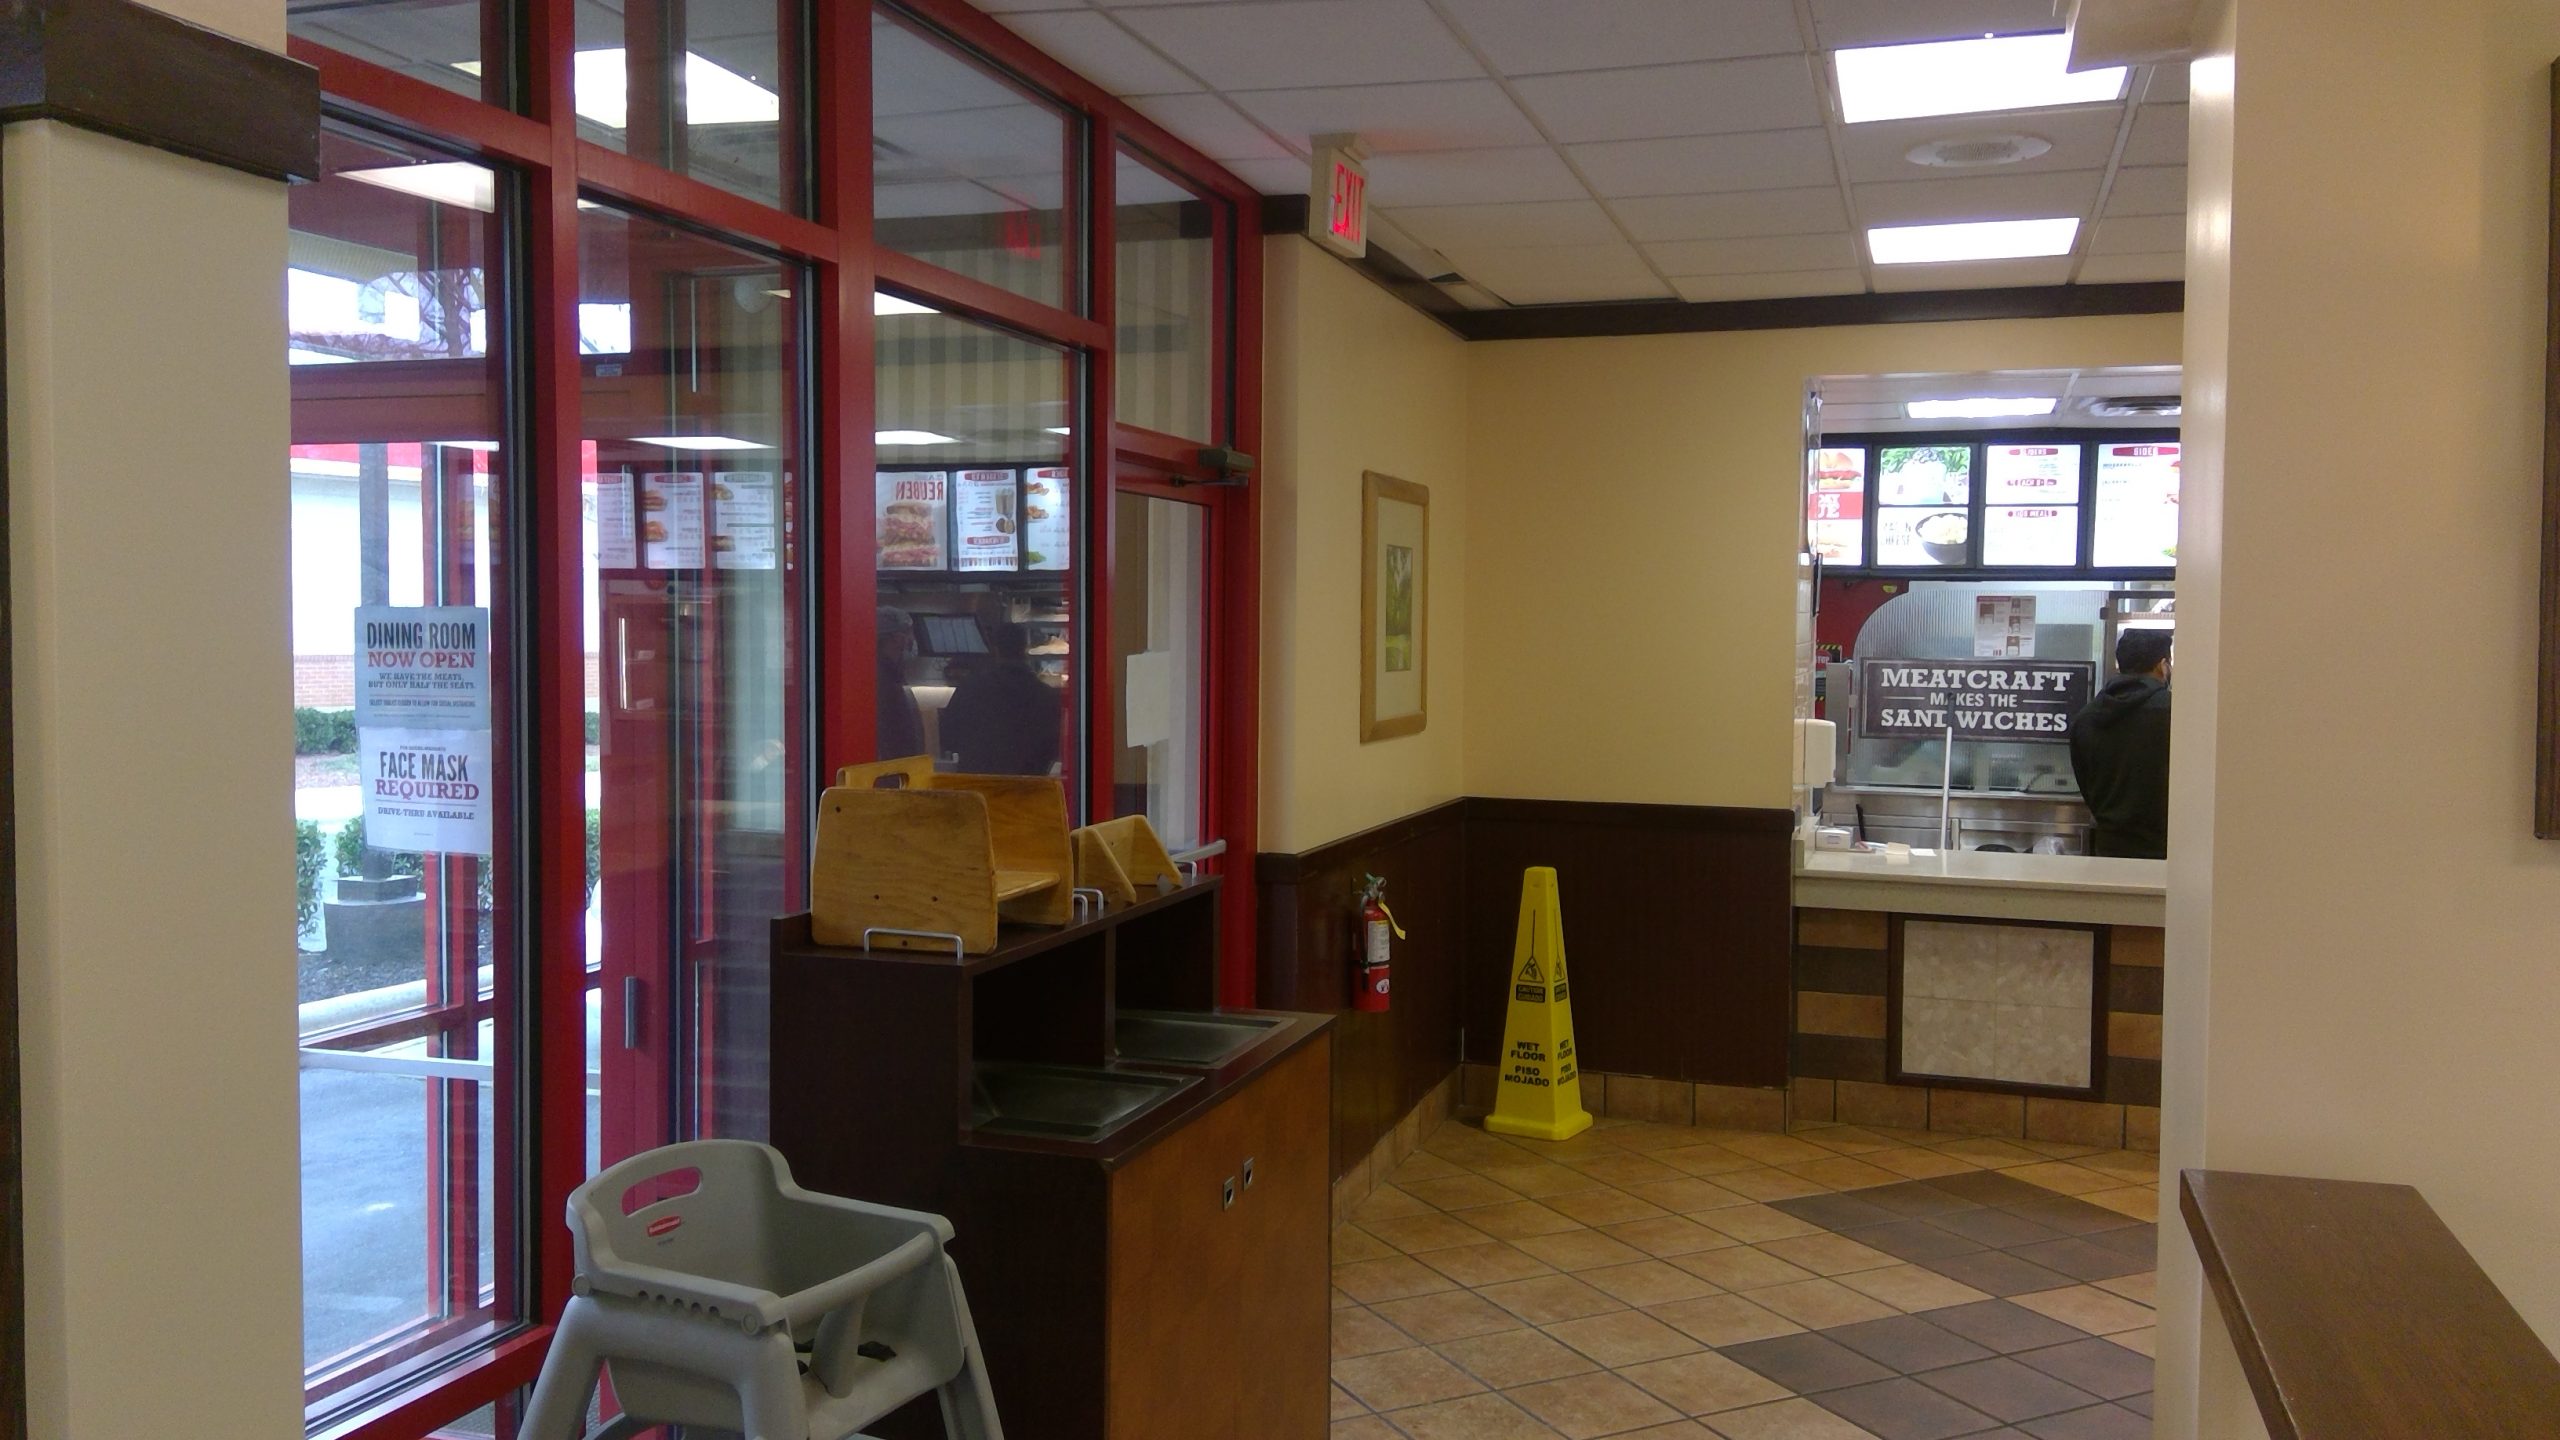 Commercial Food Service Interior Painting Project After